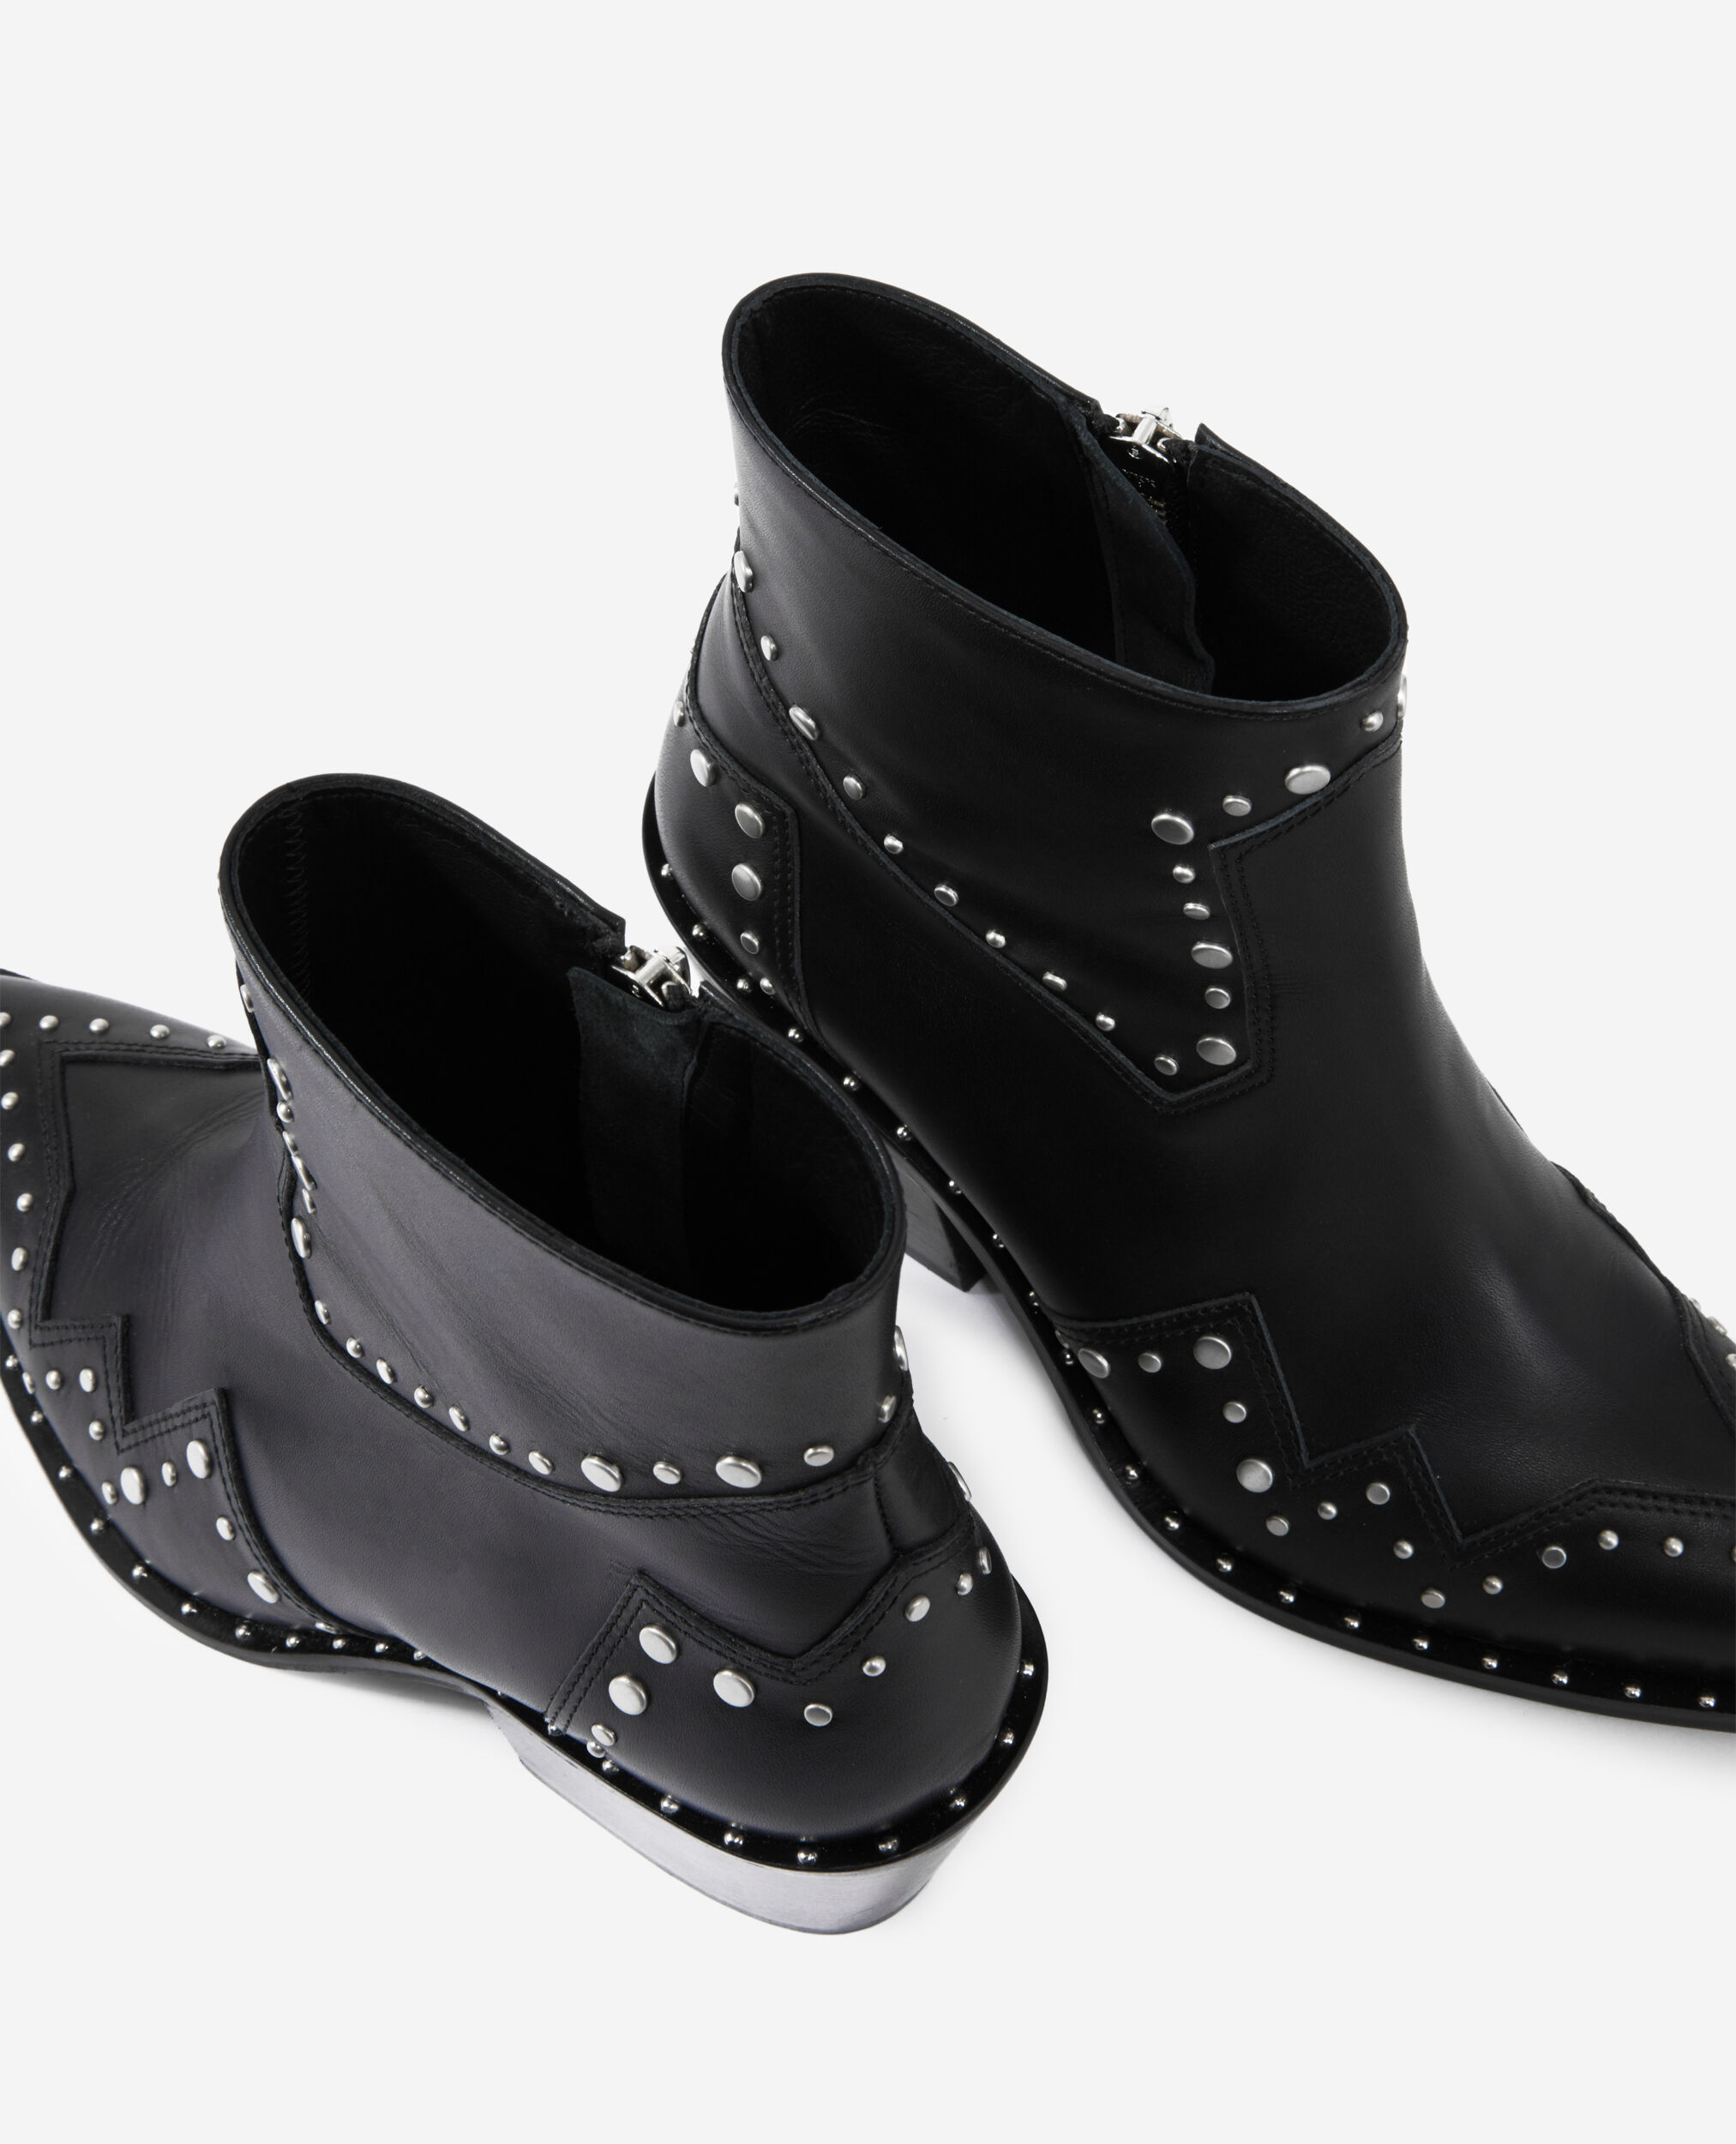 Heeled leather boots, BLACK, hi-res image number null